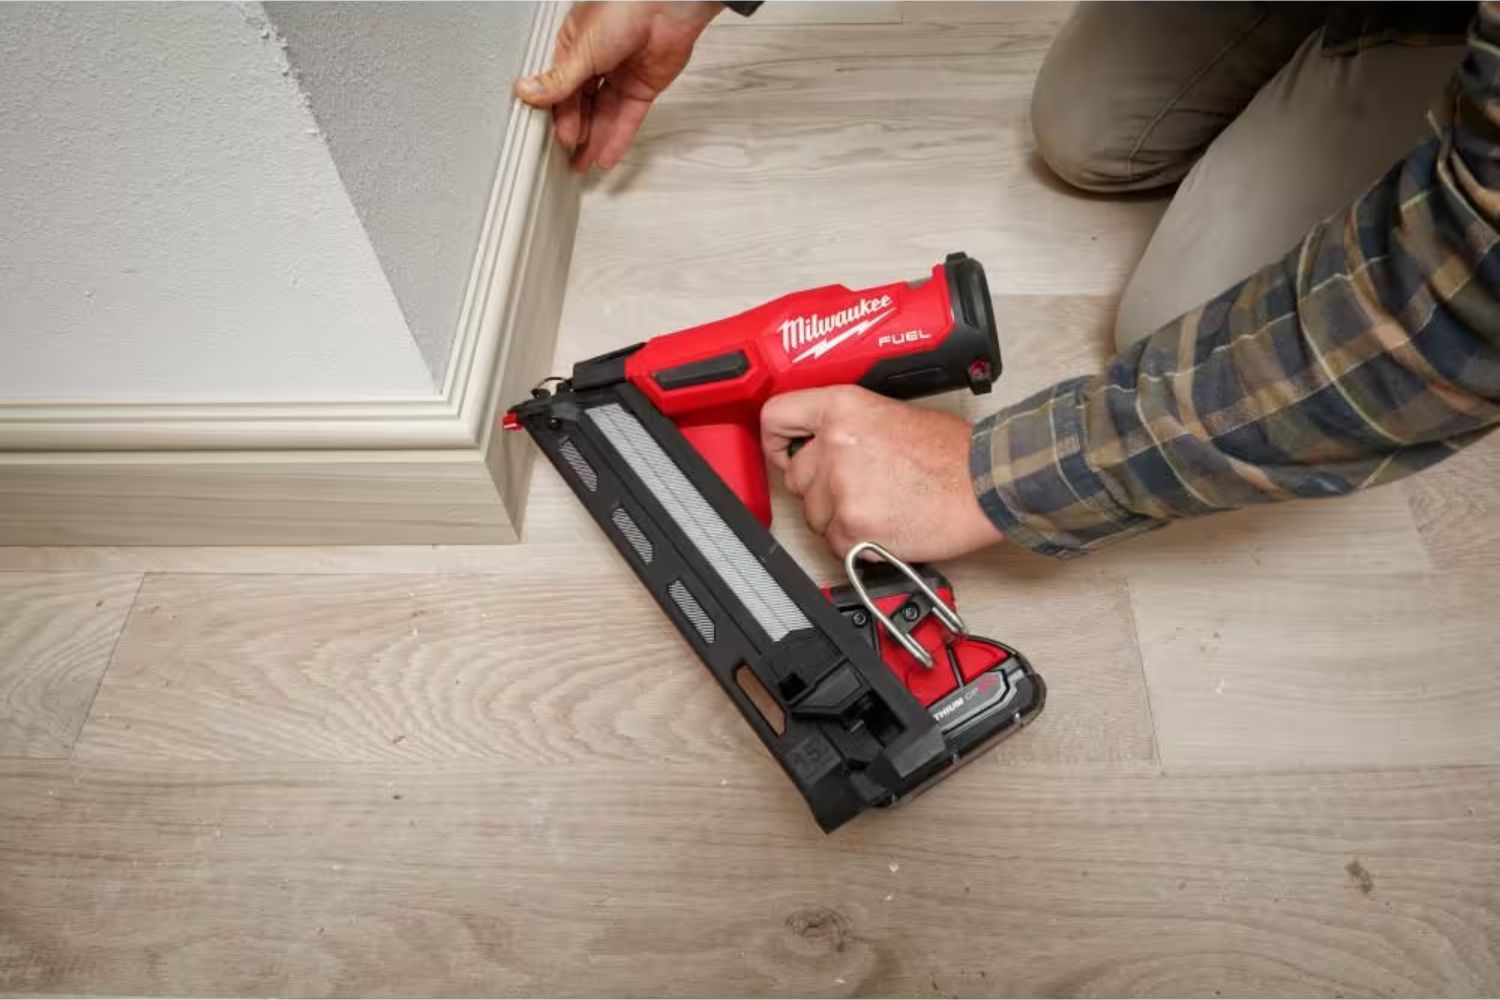 A person using the best cordless finish nailer option to install a baseboard